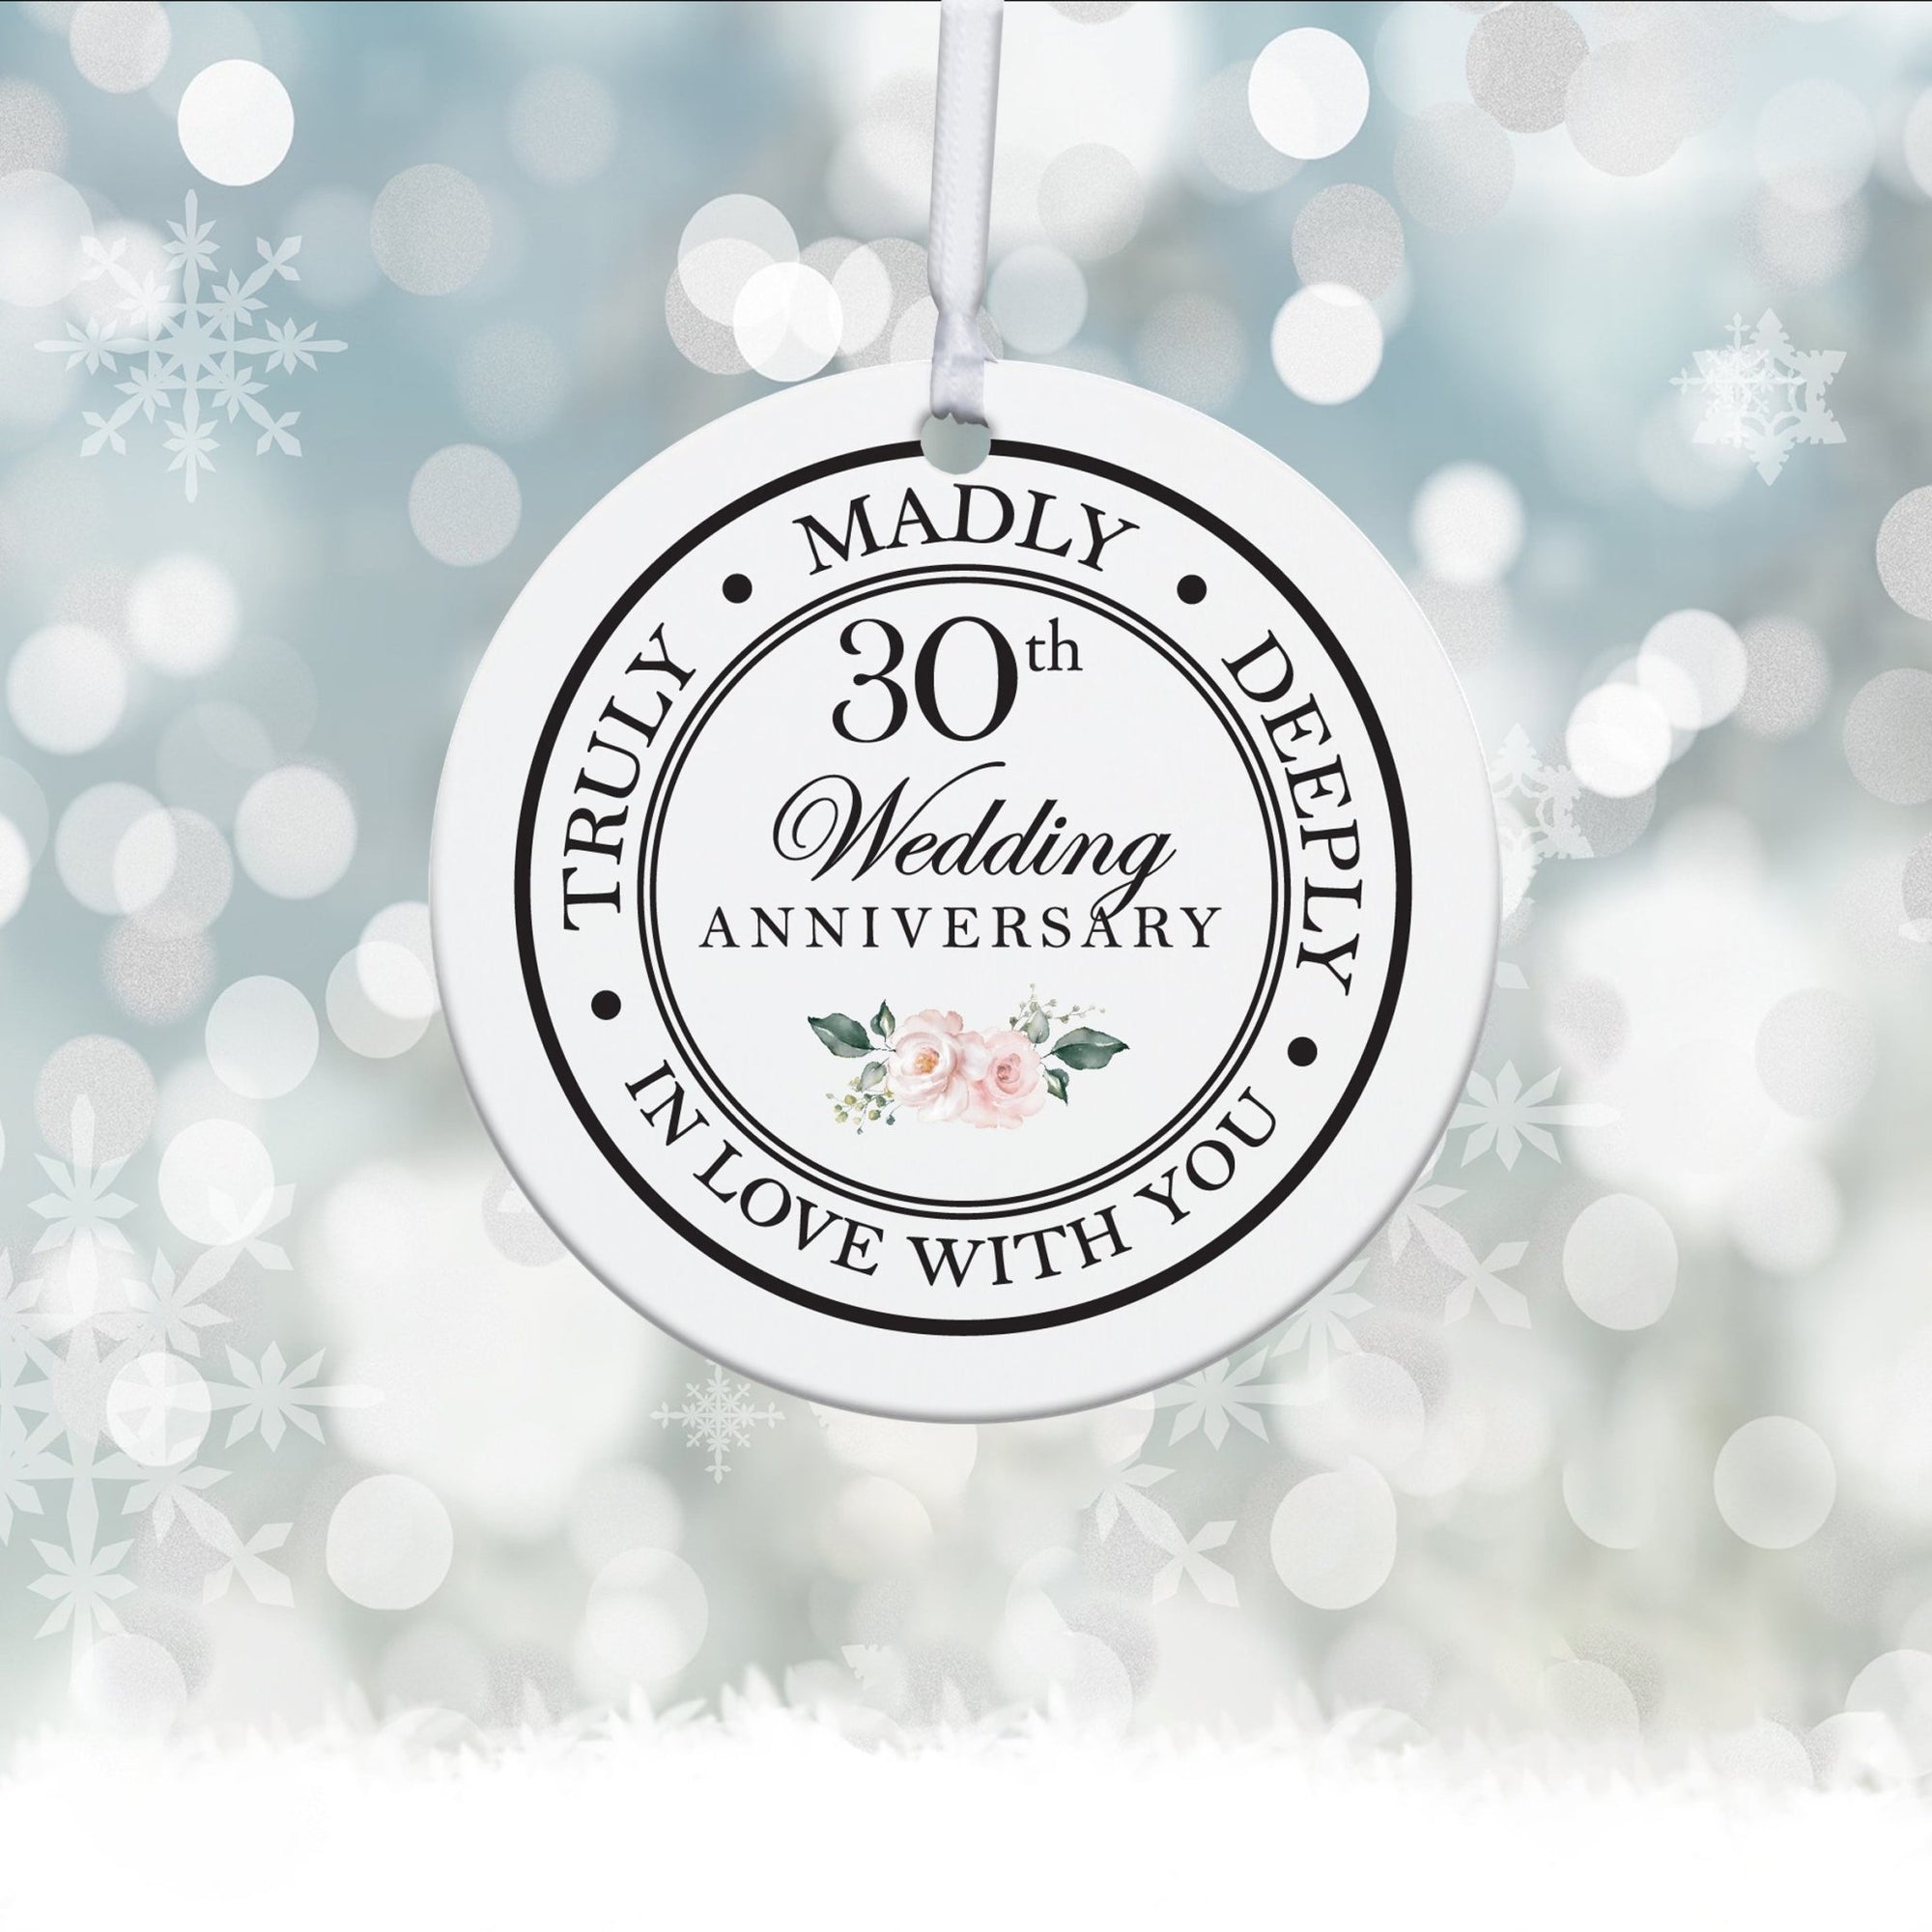 30th Wedding Anniversary White Ornament With Inspirational Message Gift Ideas - Truly, Madly, Deeply In Love With You - LifeSong Milestones